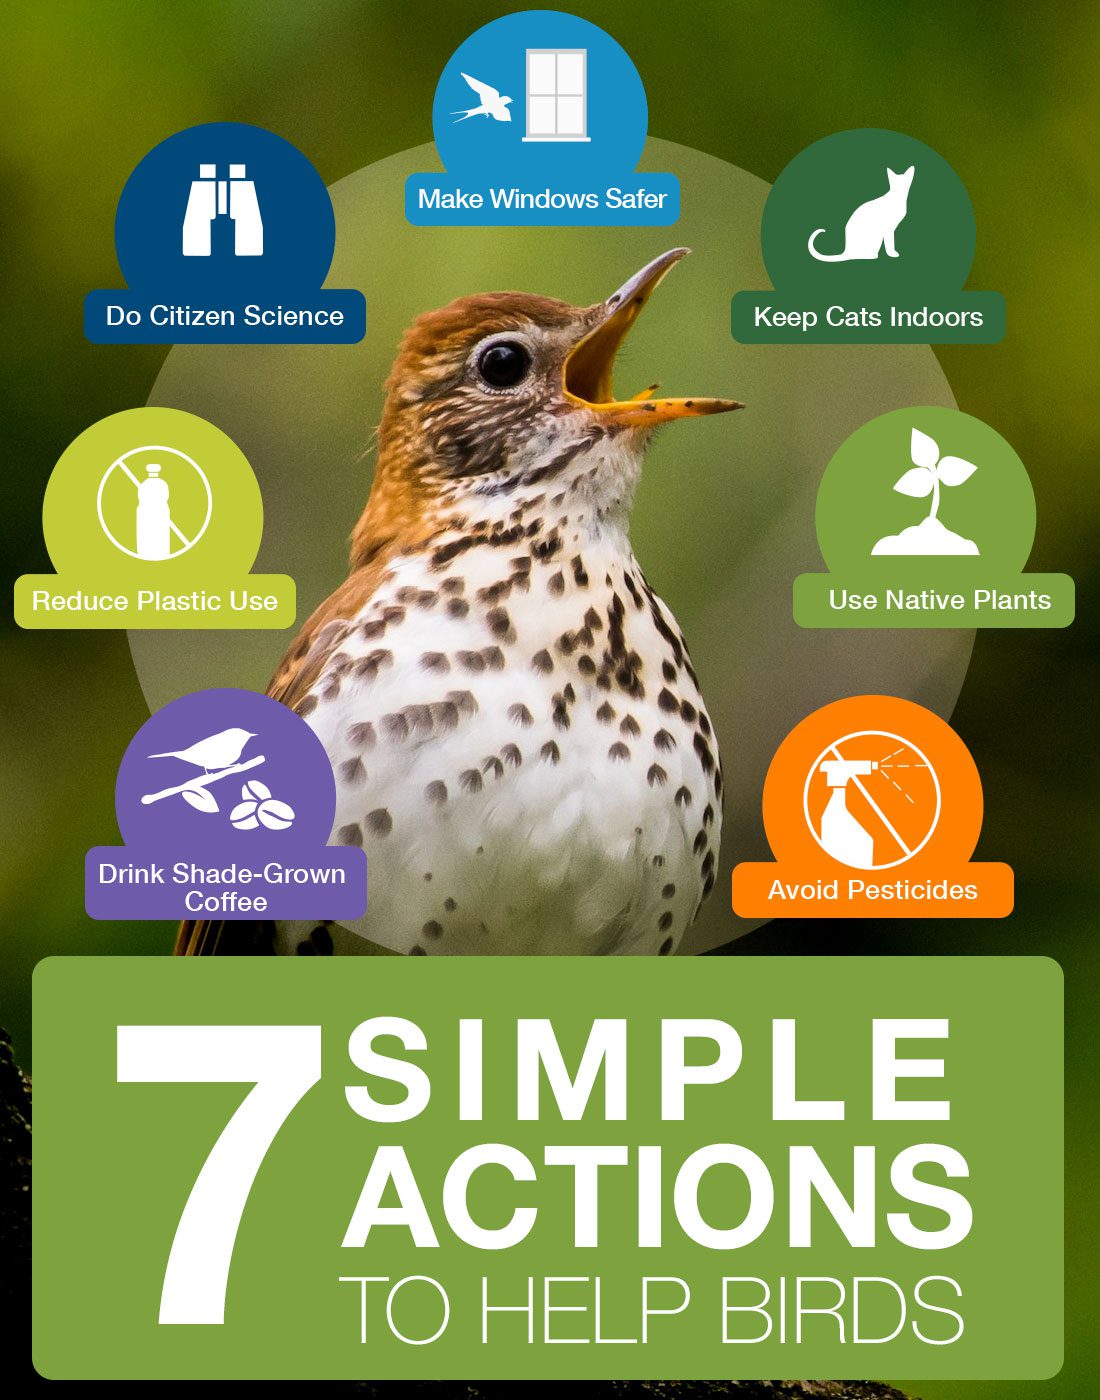 7 simple actions to help birds - drink shade-grown coffee, use less plastic, do citizen science, make windows safer, keep cats indoors, use native plants, avoid pesticides